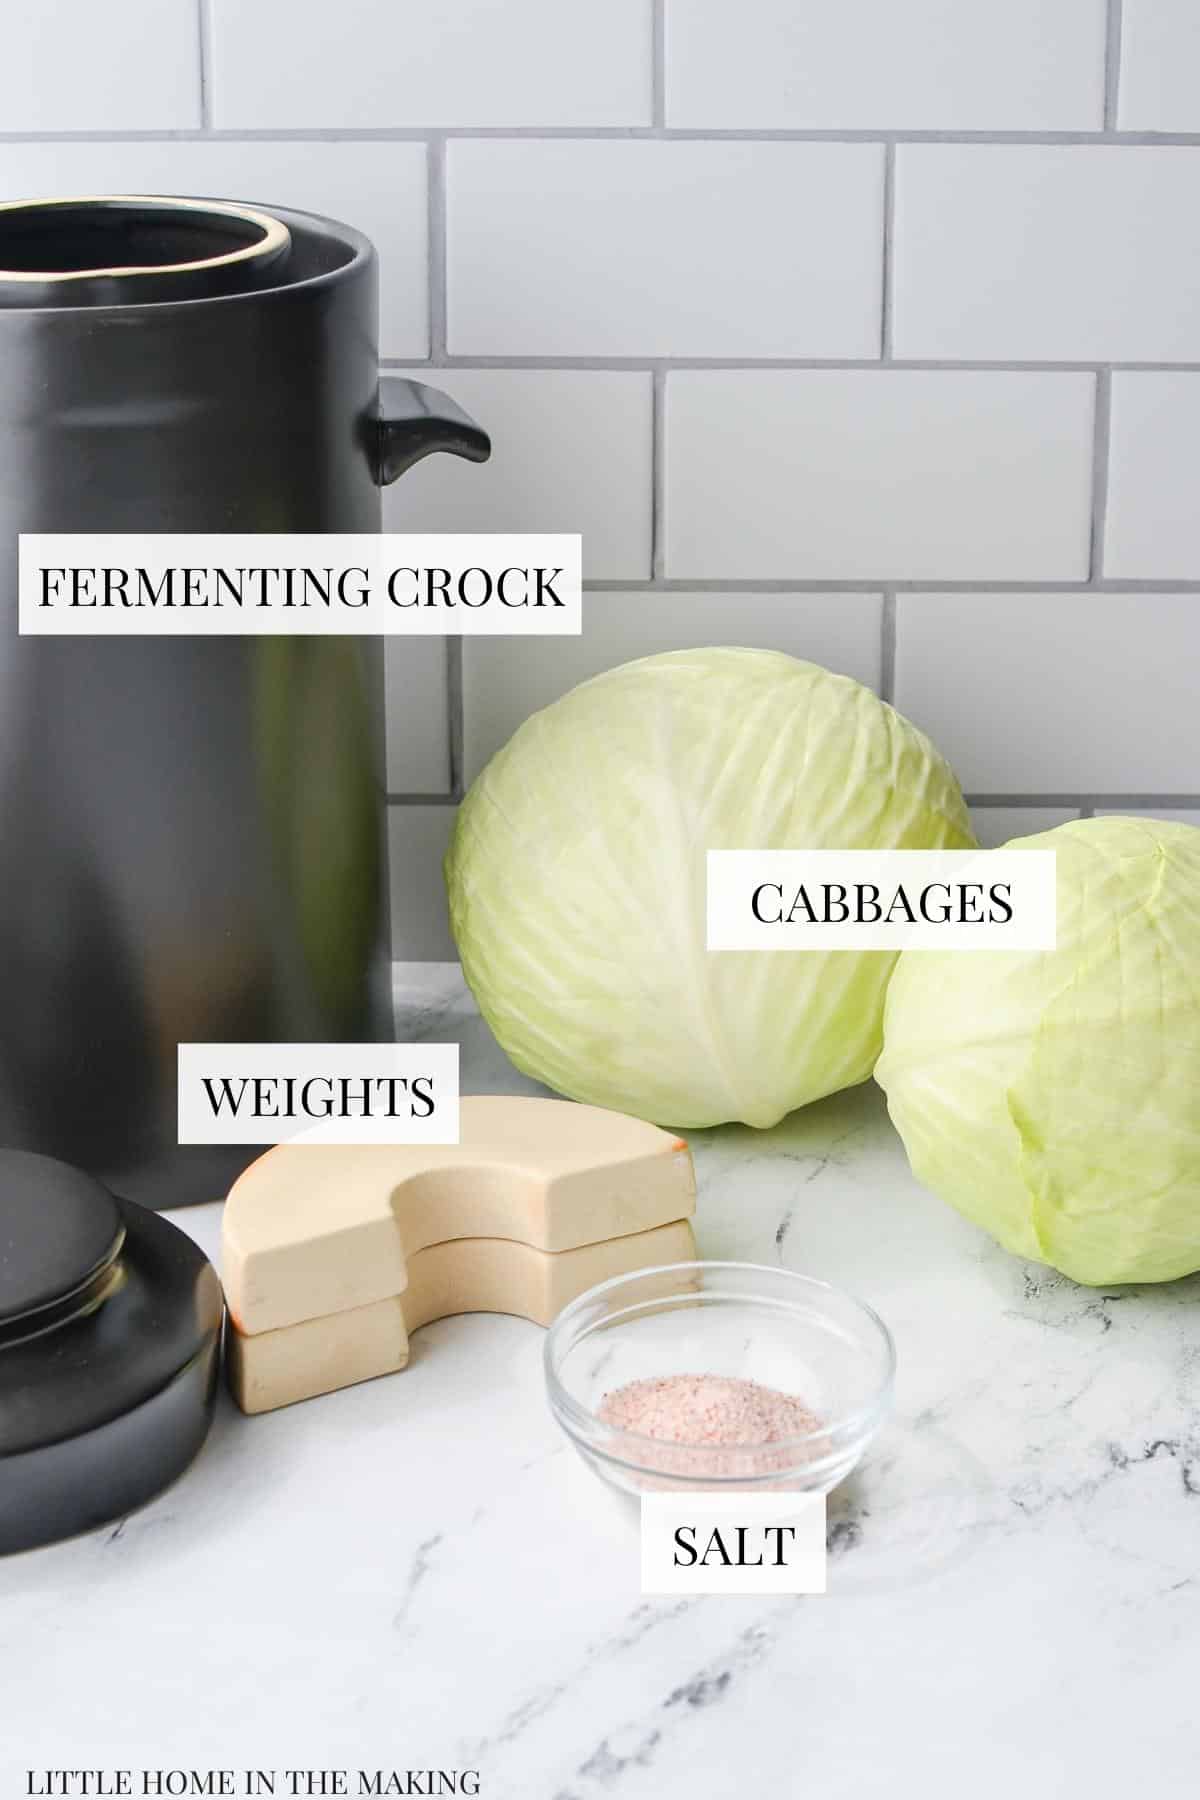 The needed ingredients and equipment to make sauerkraut in a crock.